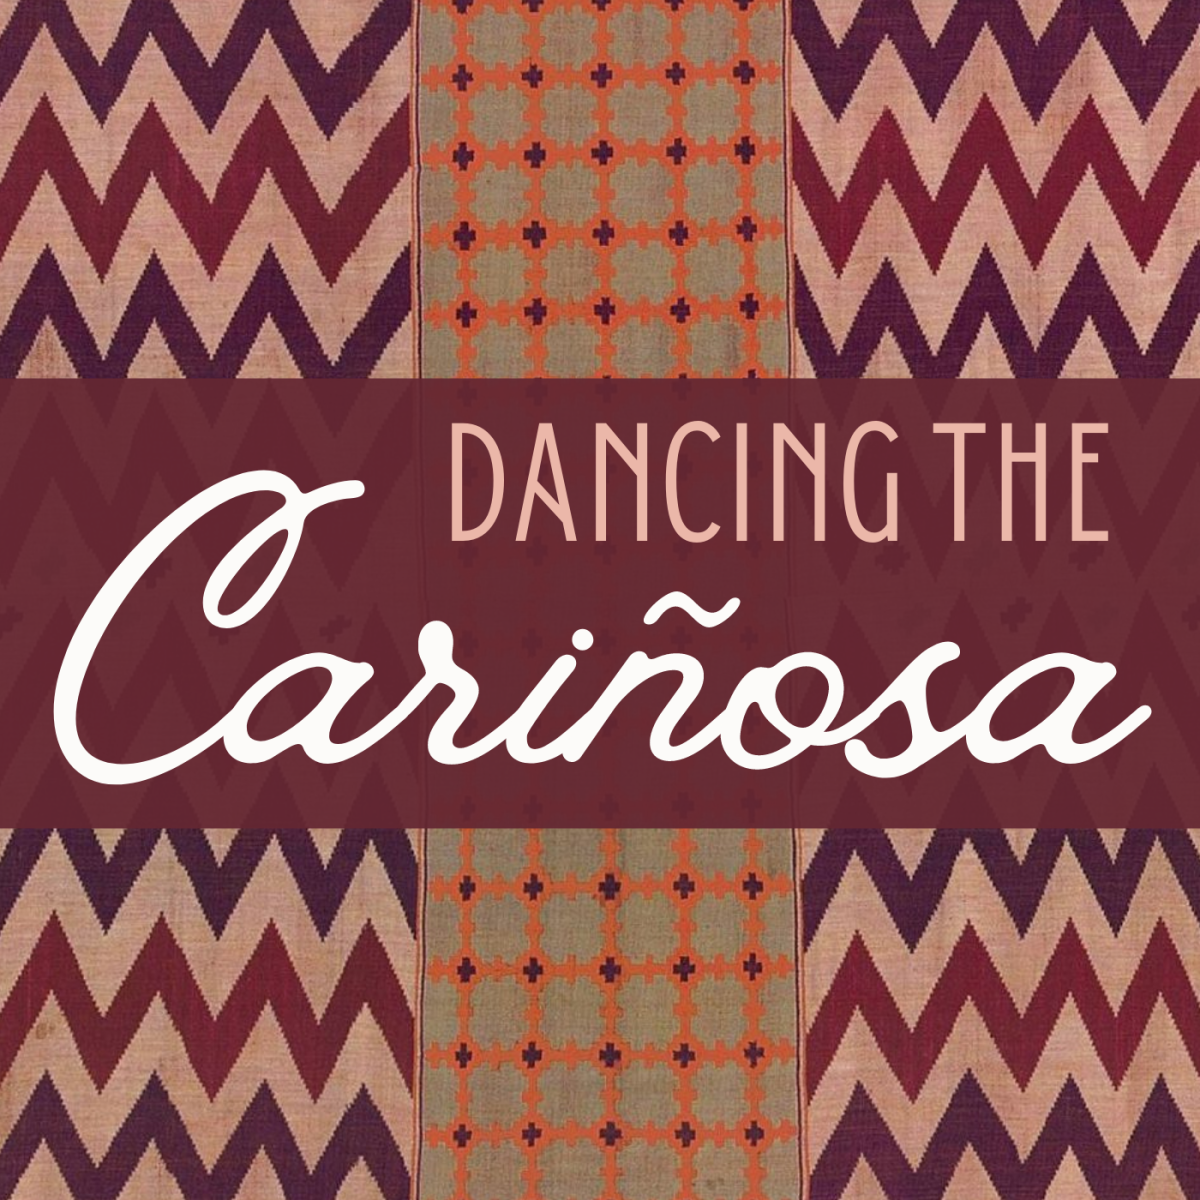 How to Dance the Cariñosa: Steps and Costumes